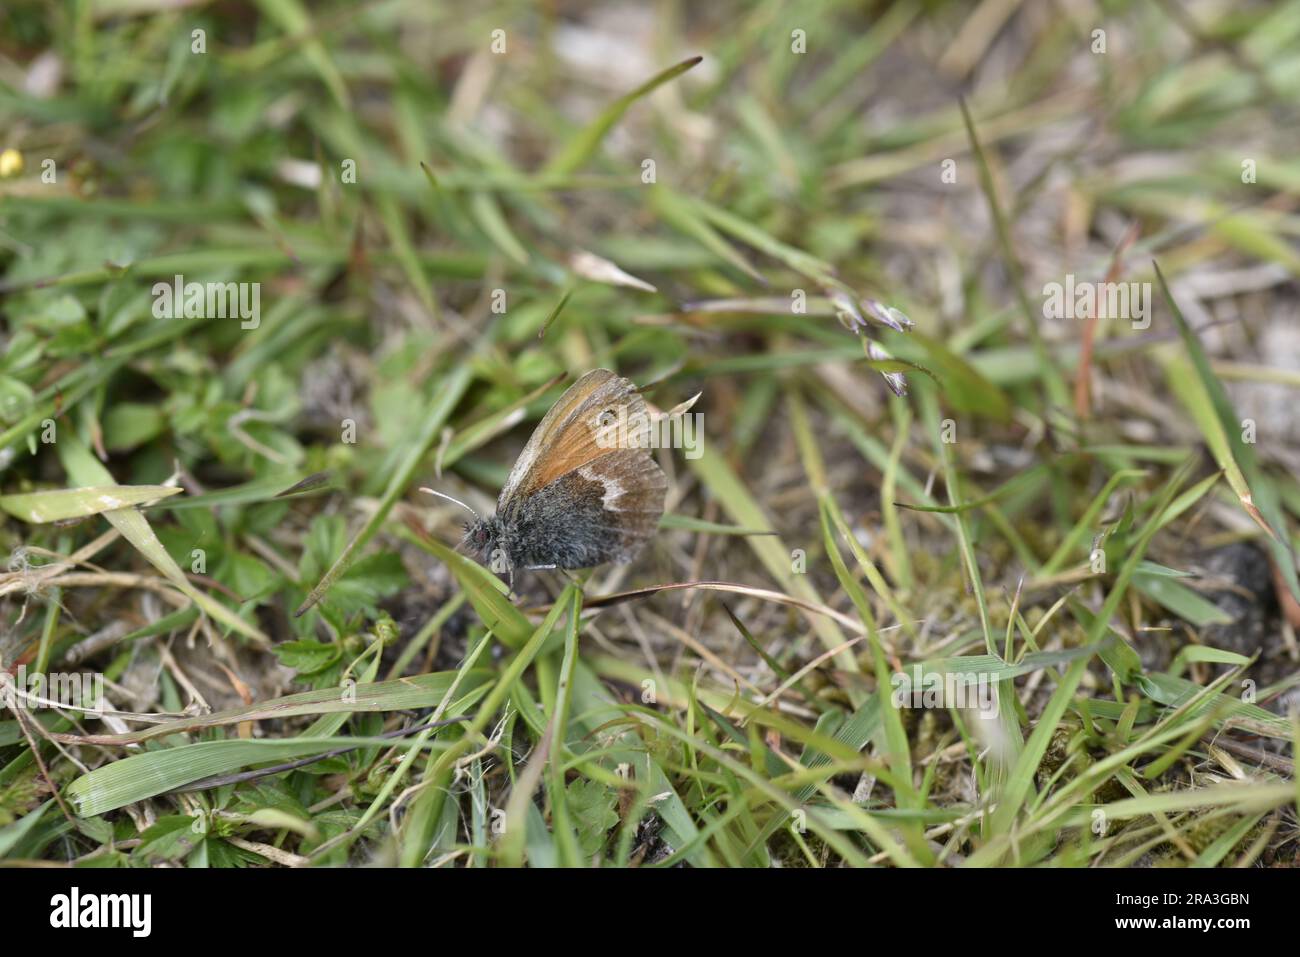 Large Heath Butterfly (Coenonympha tullia) on Damp Grass in Left-Profile, taken on the Isle of Man, UK in June Stock Photo